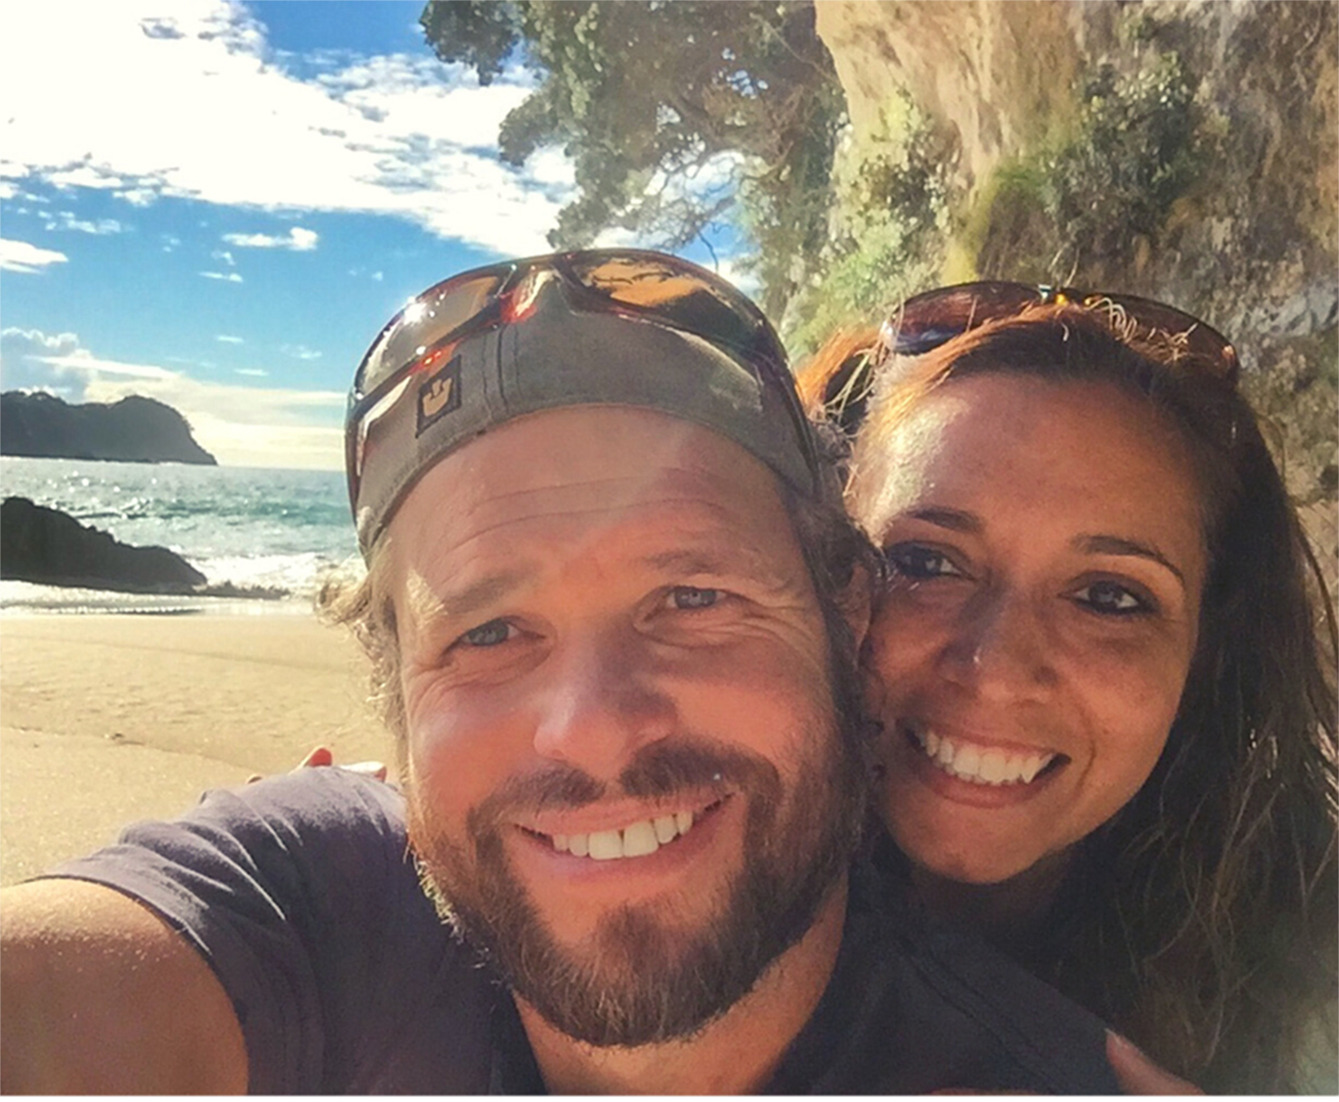 Beach Boner Couple - Kiwi mum and dad's crusade against porn: Rob Cope and Zareen Sheikh-Cope  make documentary on what our kids watch online - NZ Herald